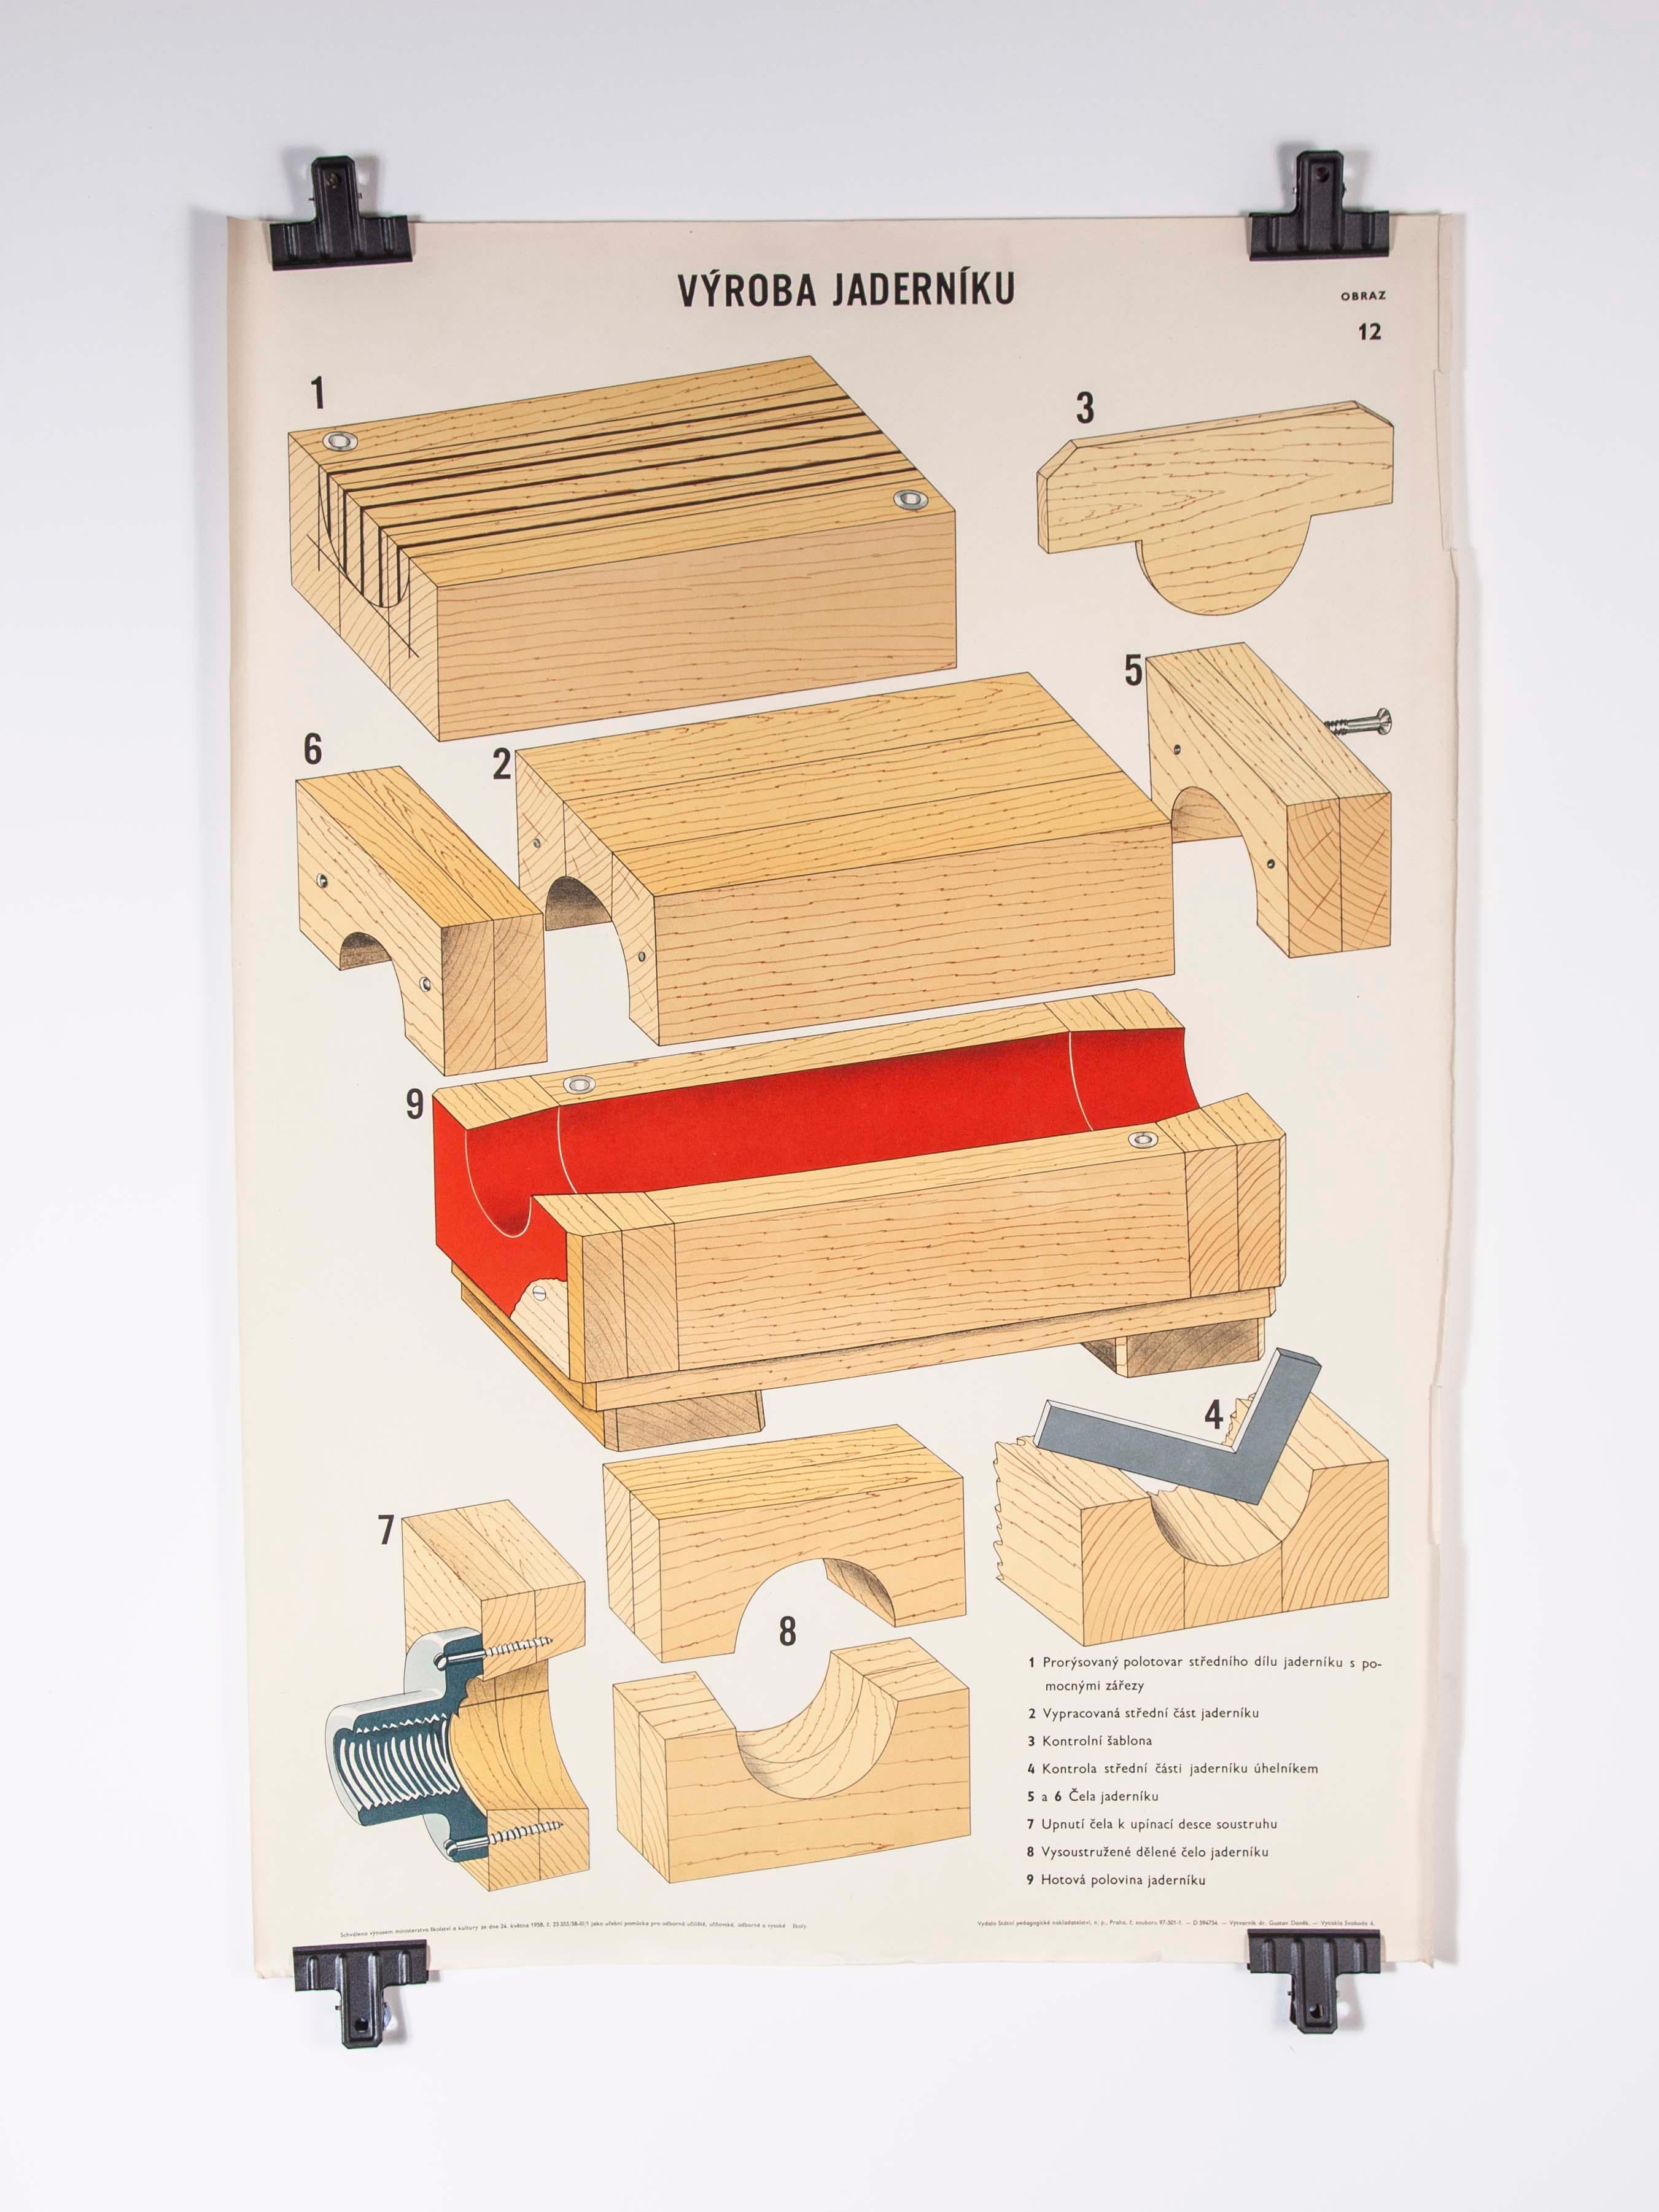 Czech technical industrial drawing – foundry mould engineering poster – 11

Sourced from an old engineering workshop in the Czech Republic, an amazing series of technical Industrial drawings explaining the process of sand casting and creating the